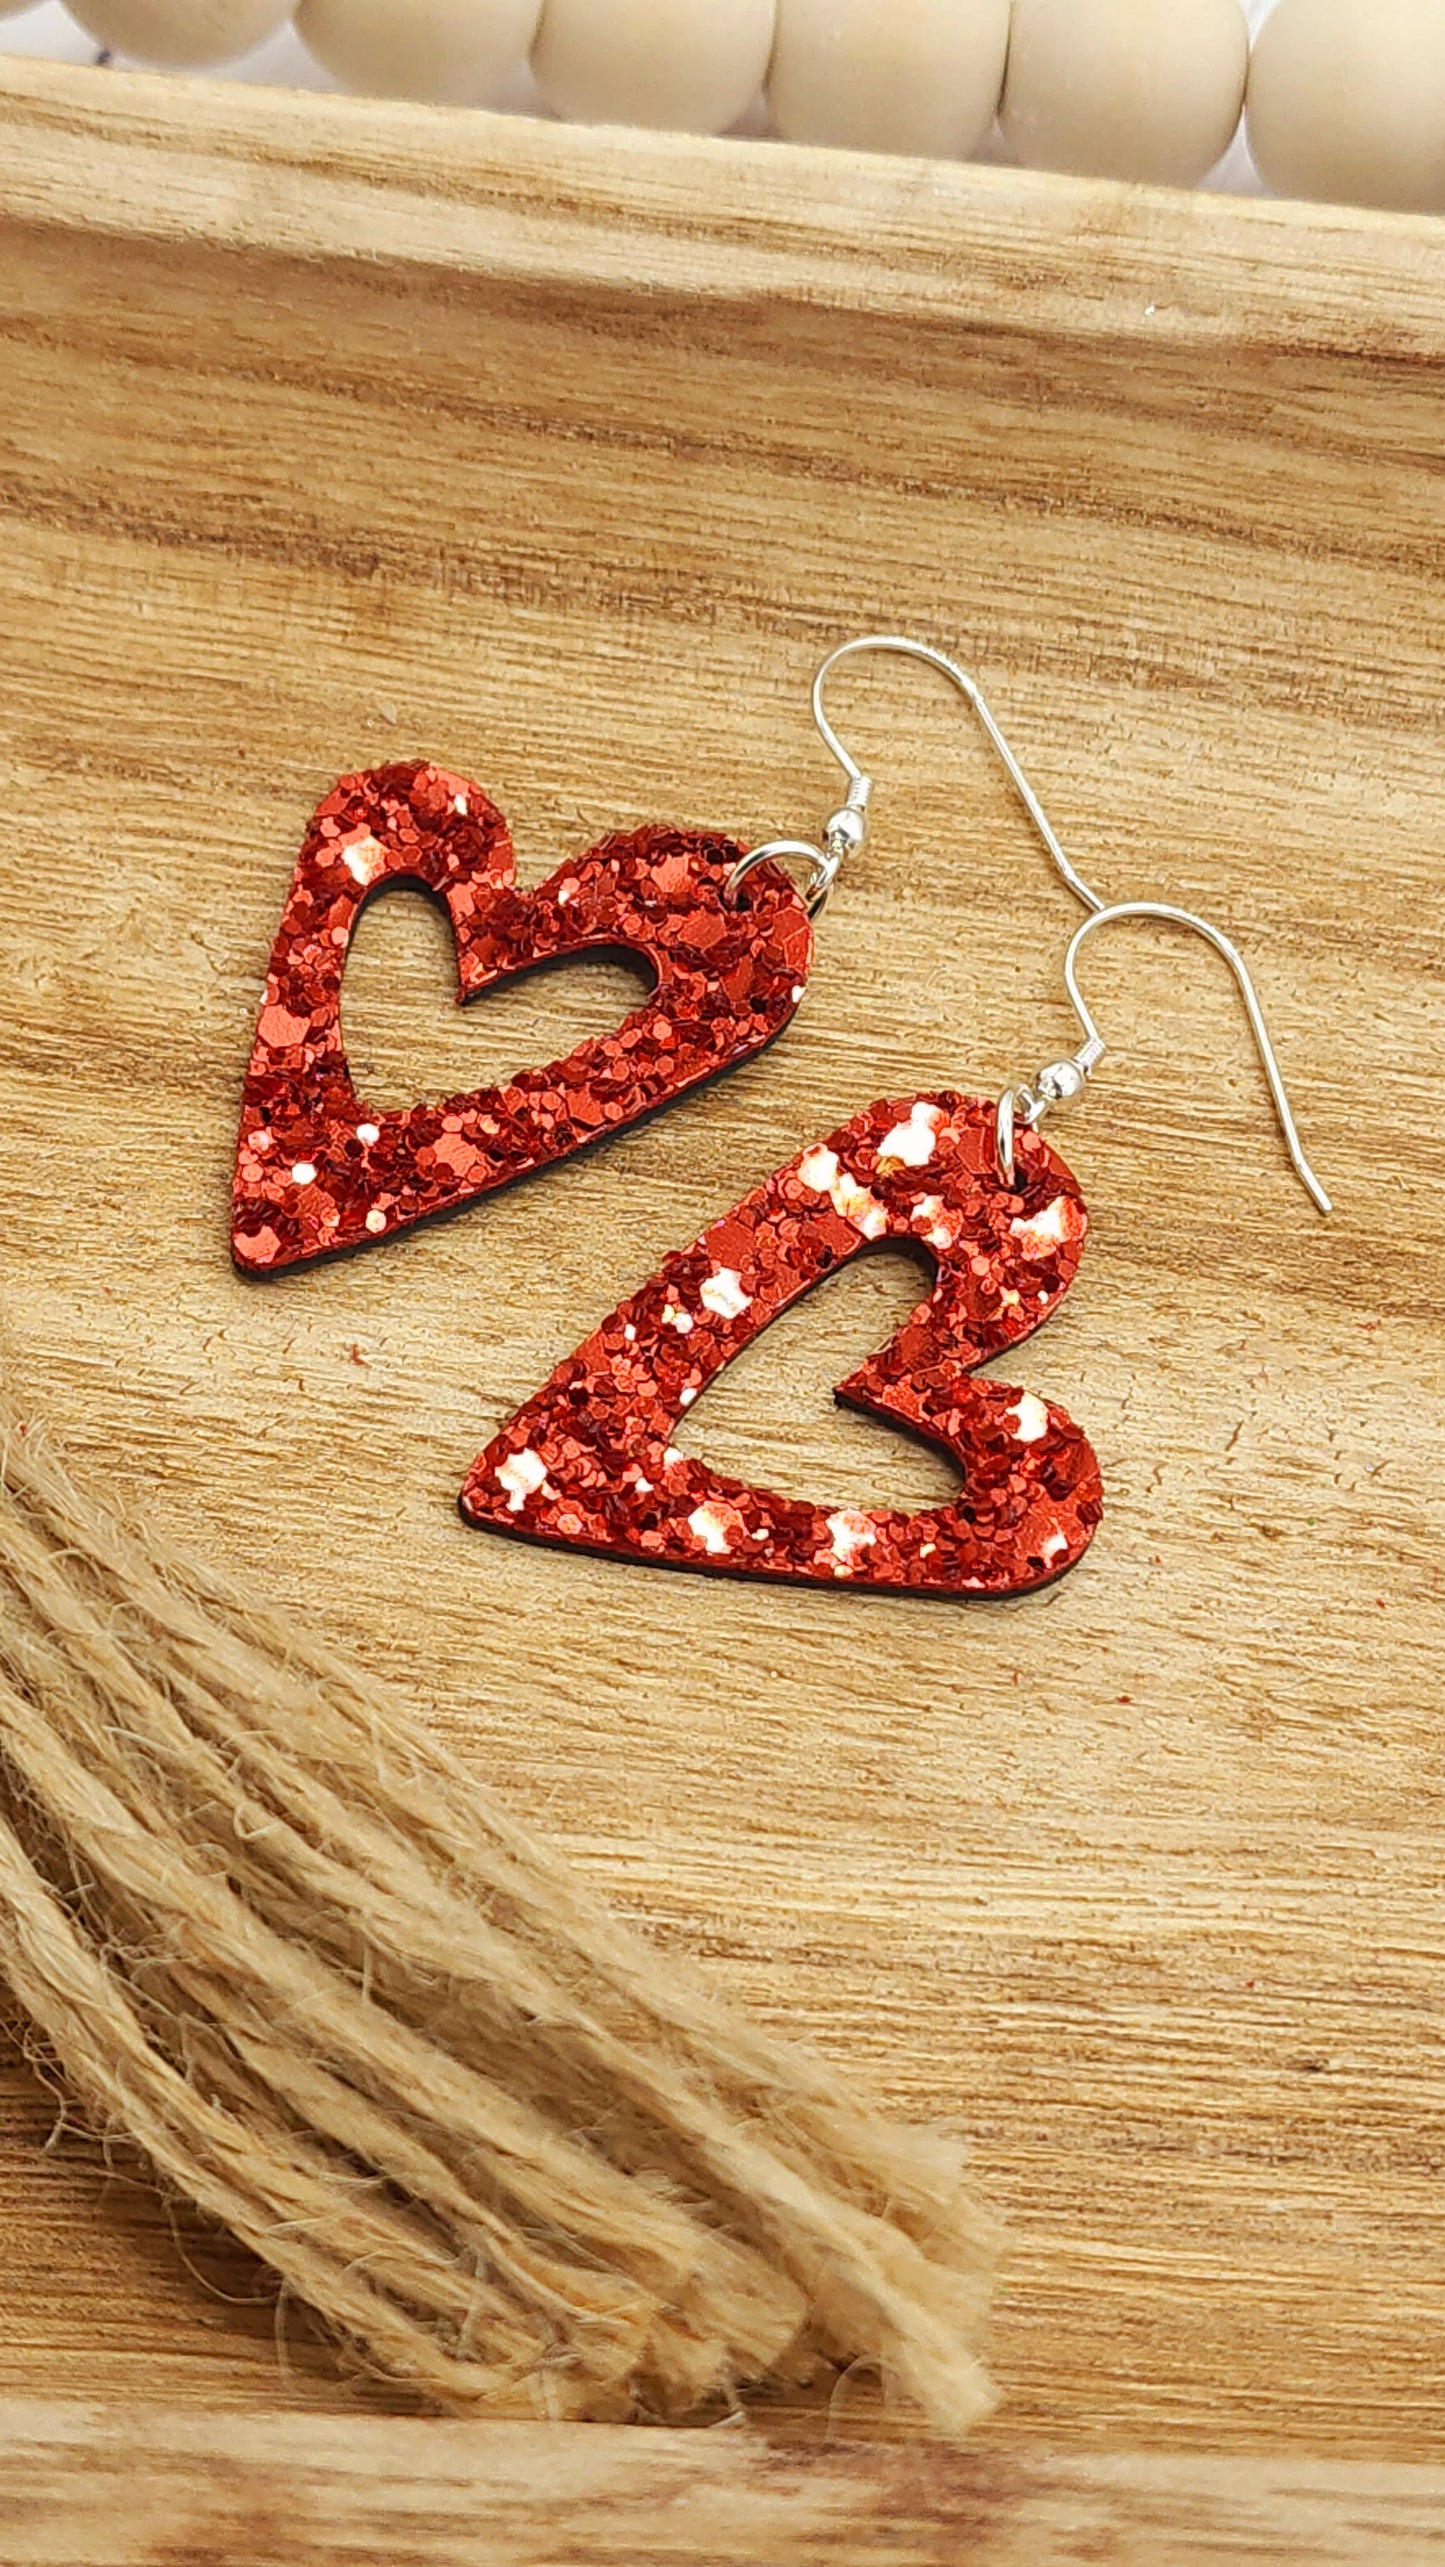 Whimsical Red Glitter Hearts